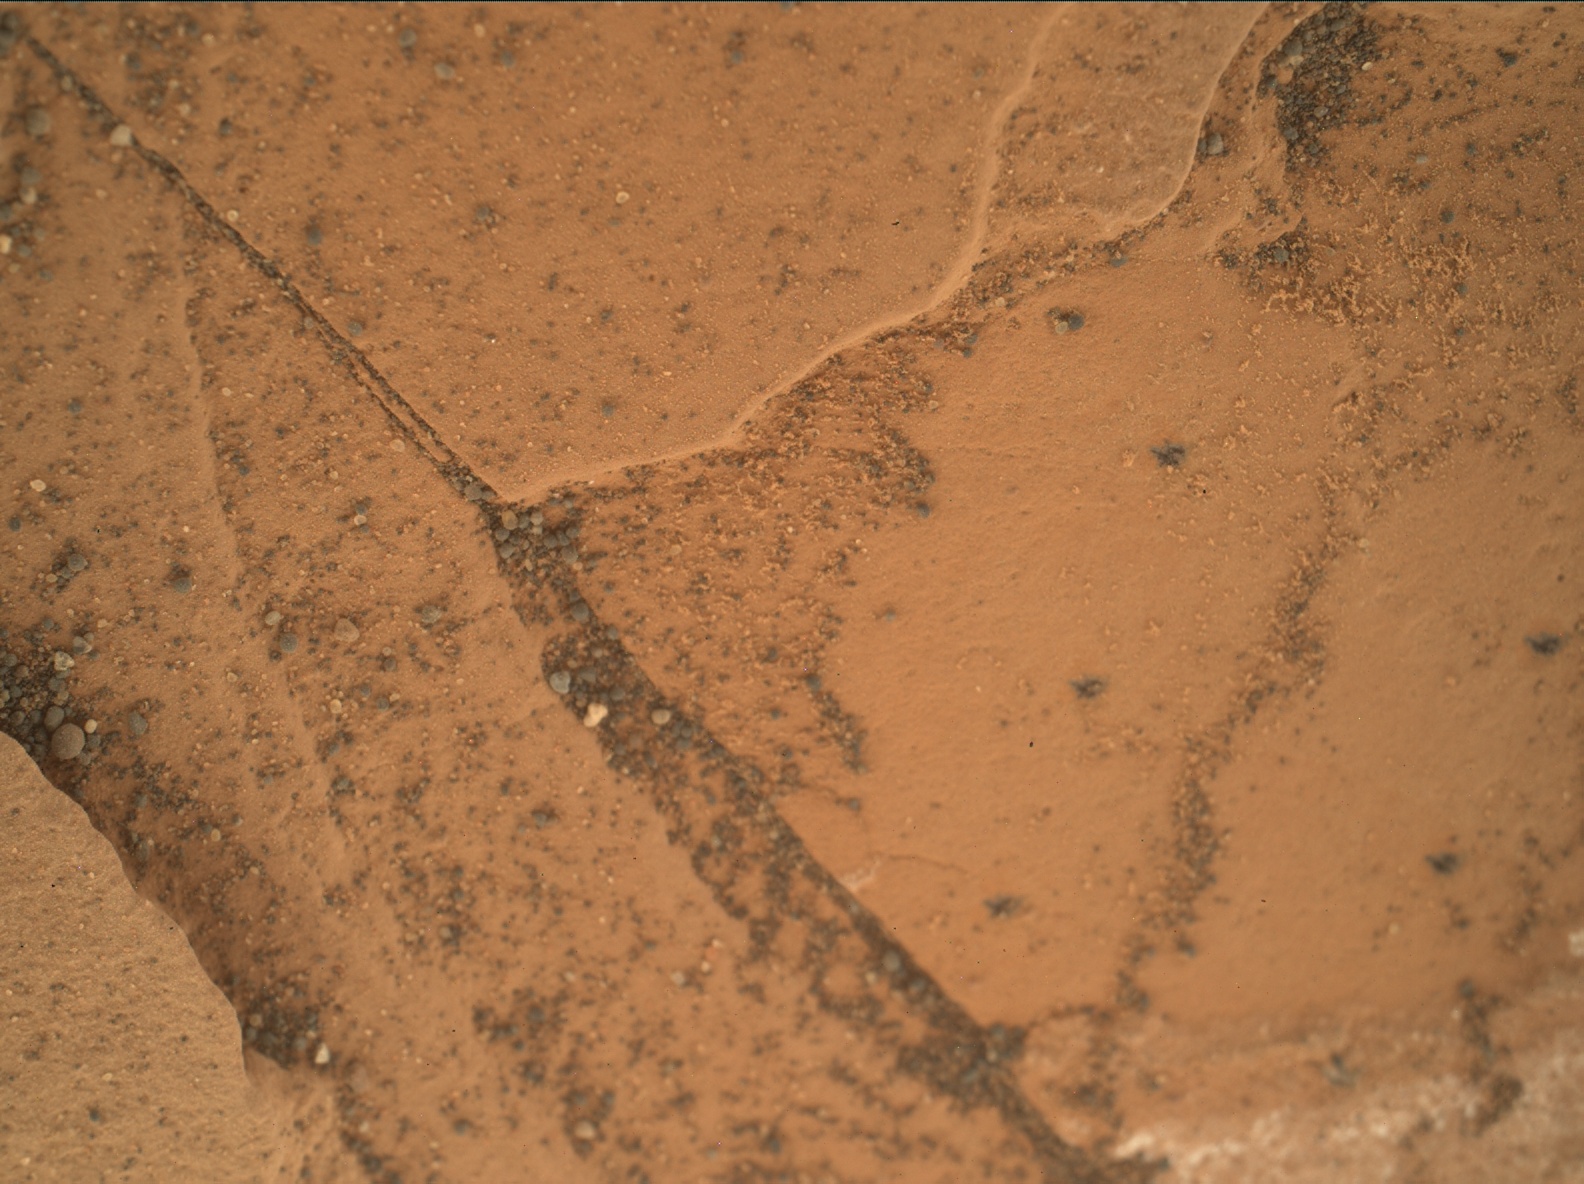 Nasa's Mars rover Curiosity acquired this image using its Mars Hand Lens Imager (MAHLI) on Sol 1781